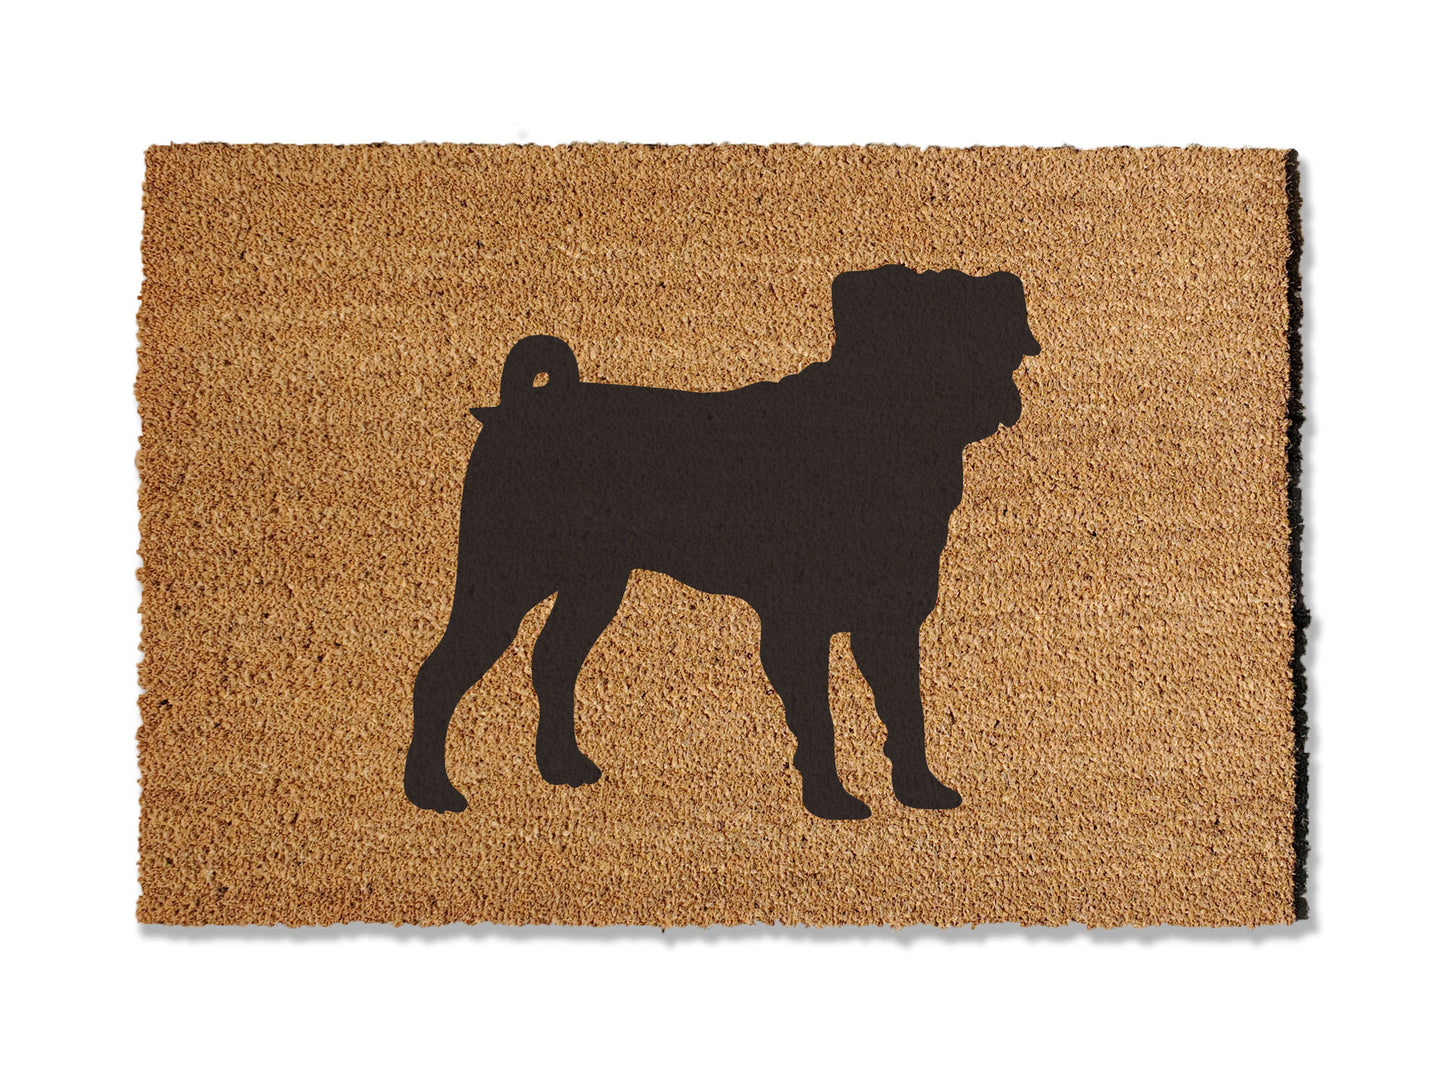 Coir doormat featuring an adorable Pug design, ideal for dog lovers. This doormat is not only charming but also effective at trapping dirt. Available in multiple sizes to suit your entryway needs.